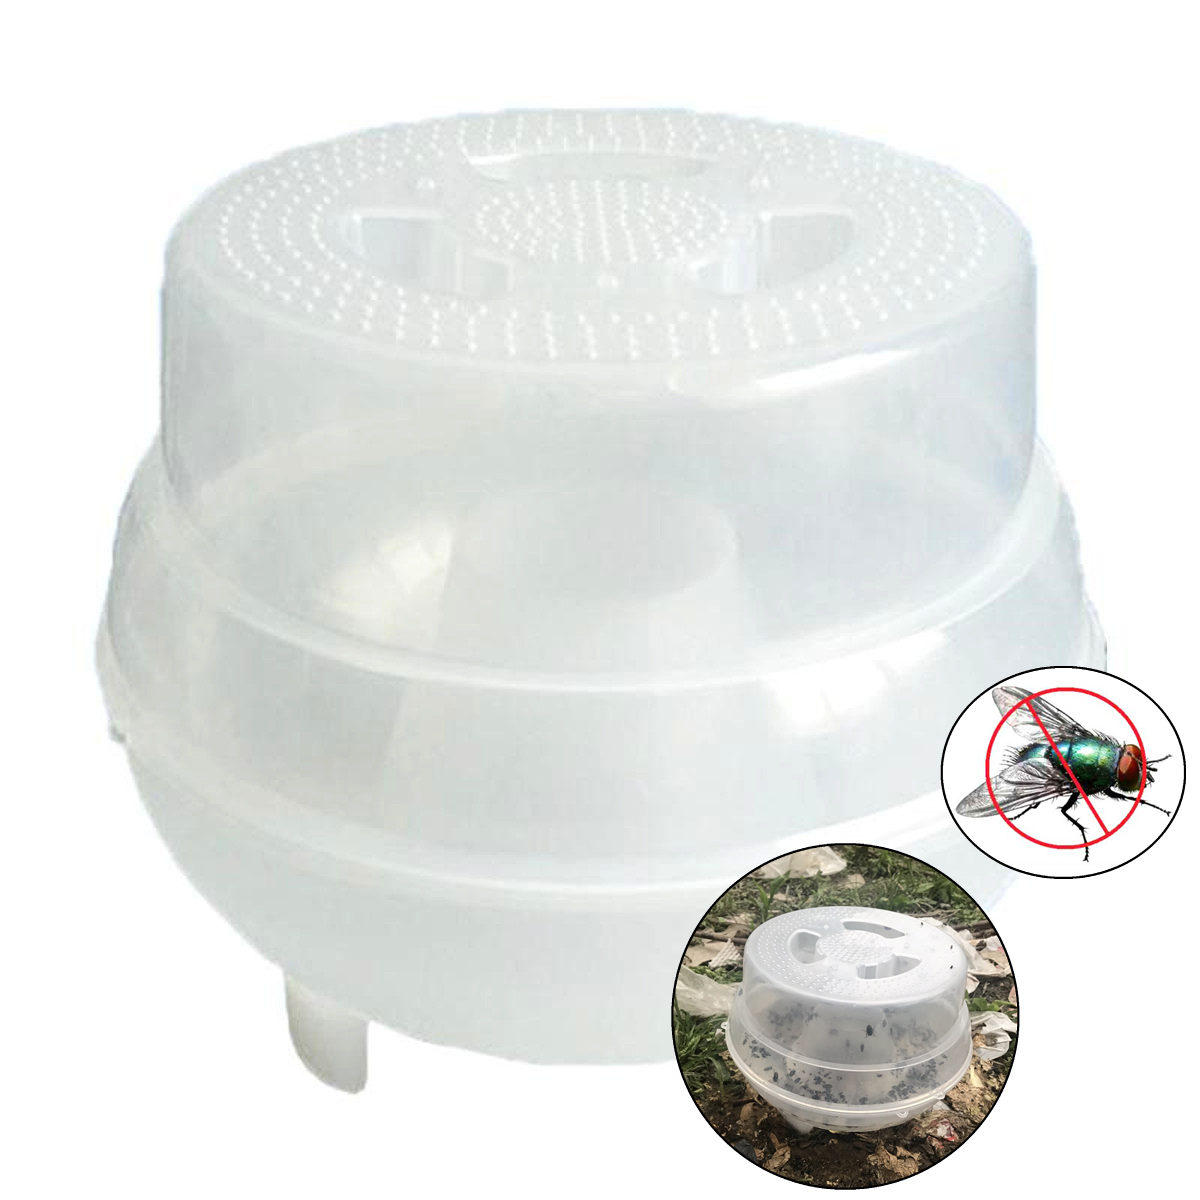 Reusable Fly Trap Device Fly Catcher Insect Mosquito Dispeller Cage With Trapping Food